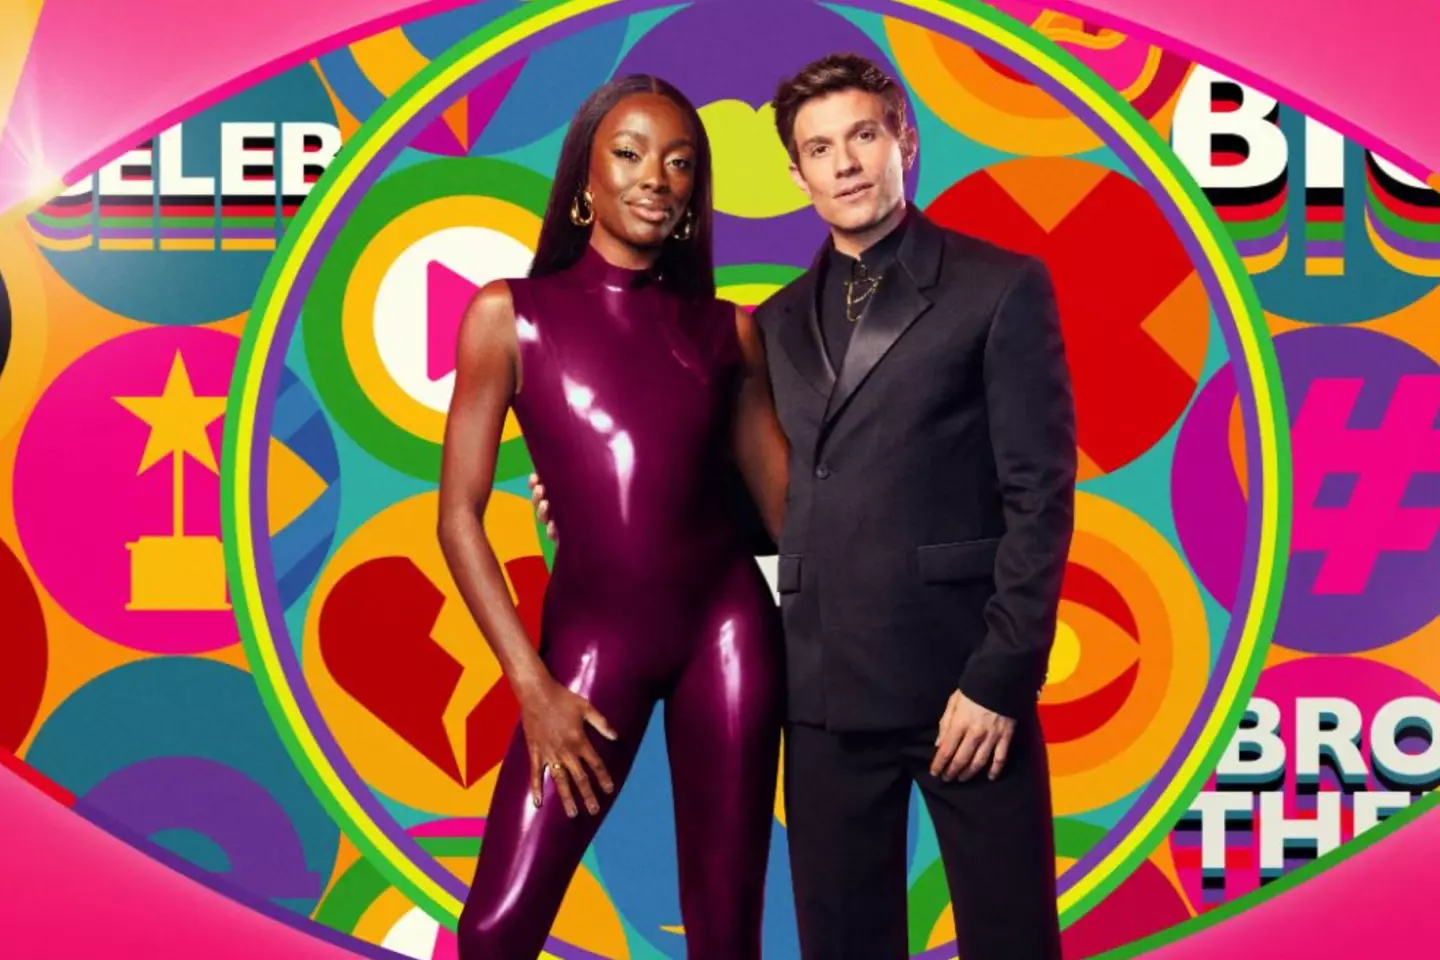 Celebrity Big Brother will air on ITV1 and ITVX on Monday, 4 March at 9pm.